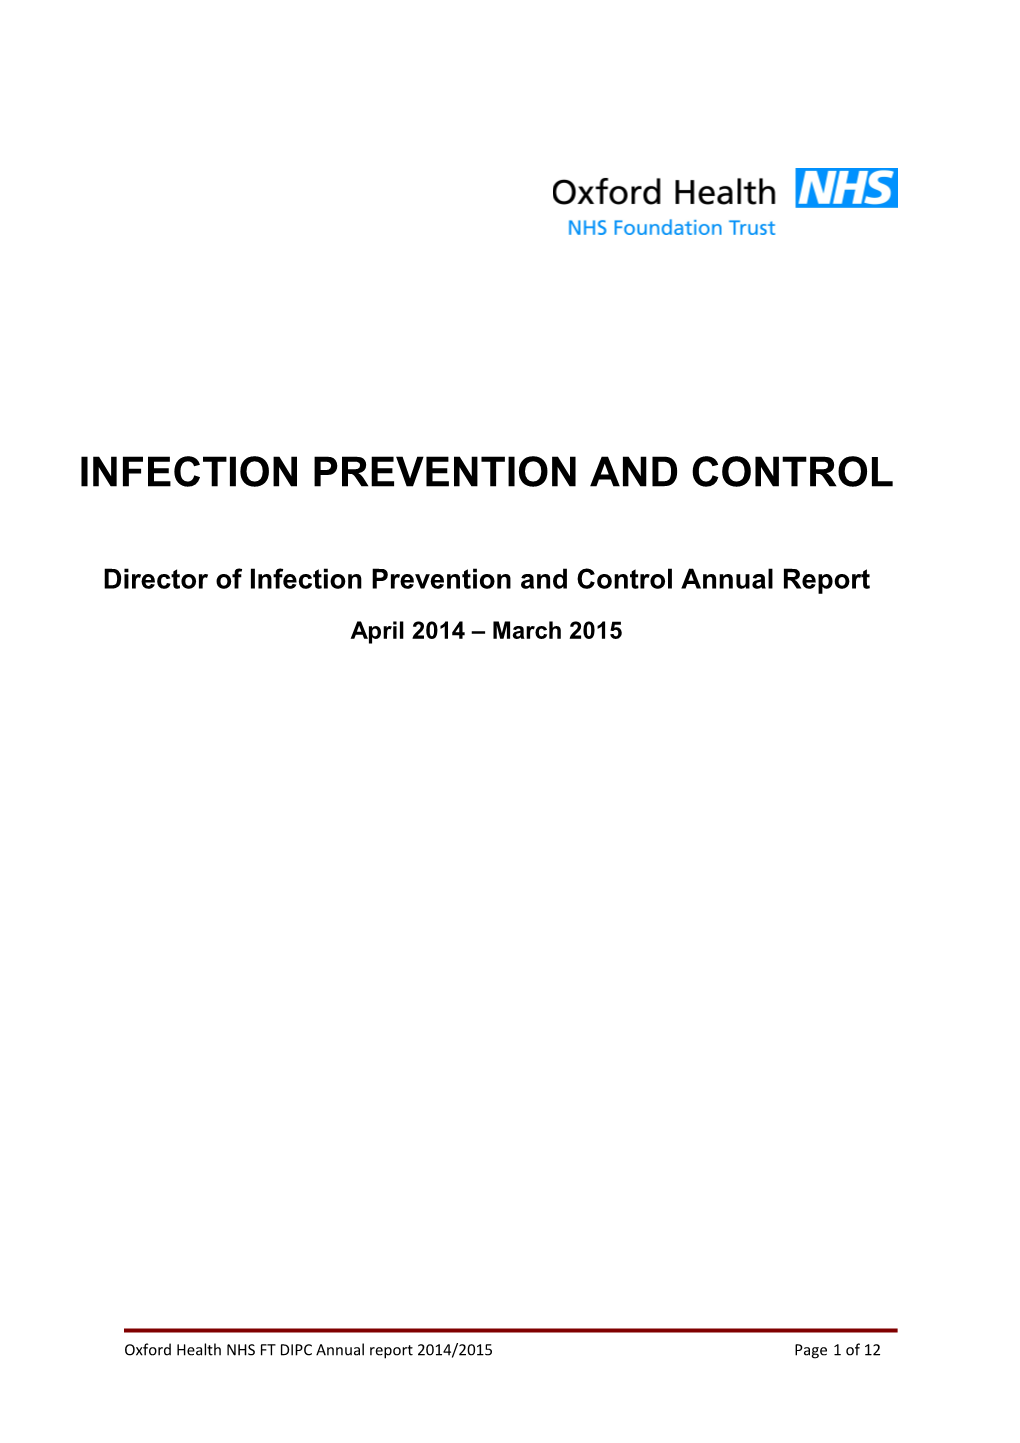 Director of Infection Prevention and Control Annual Report